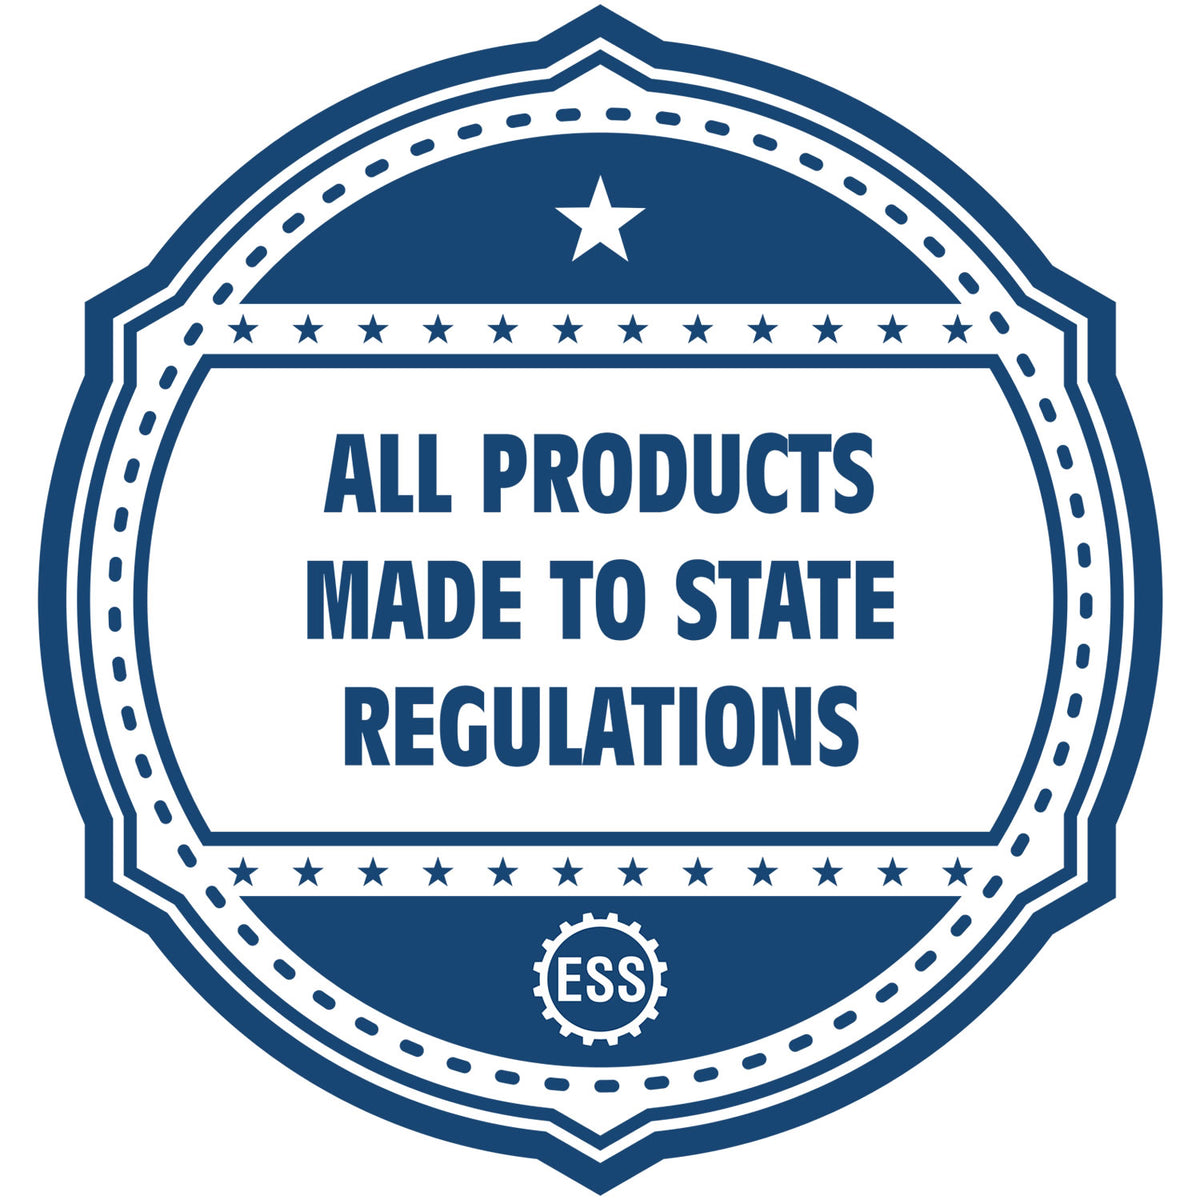 An icon or badge element for the Heavy-Duty Minnesota Rectangular Notary Stamp showing that this product is made in compliance with state regulations.